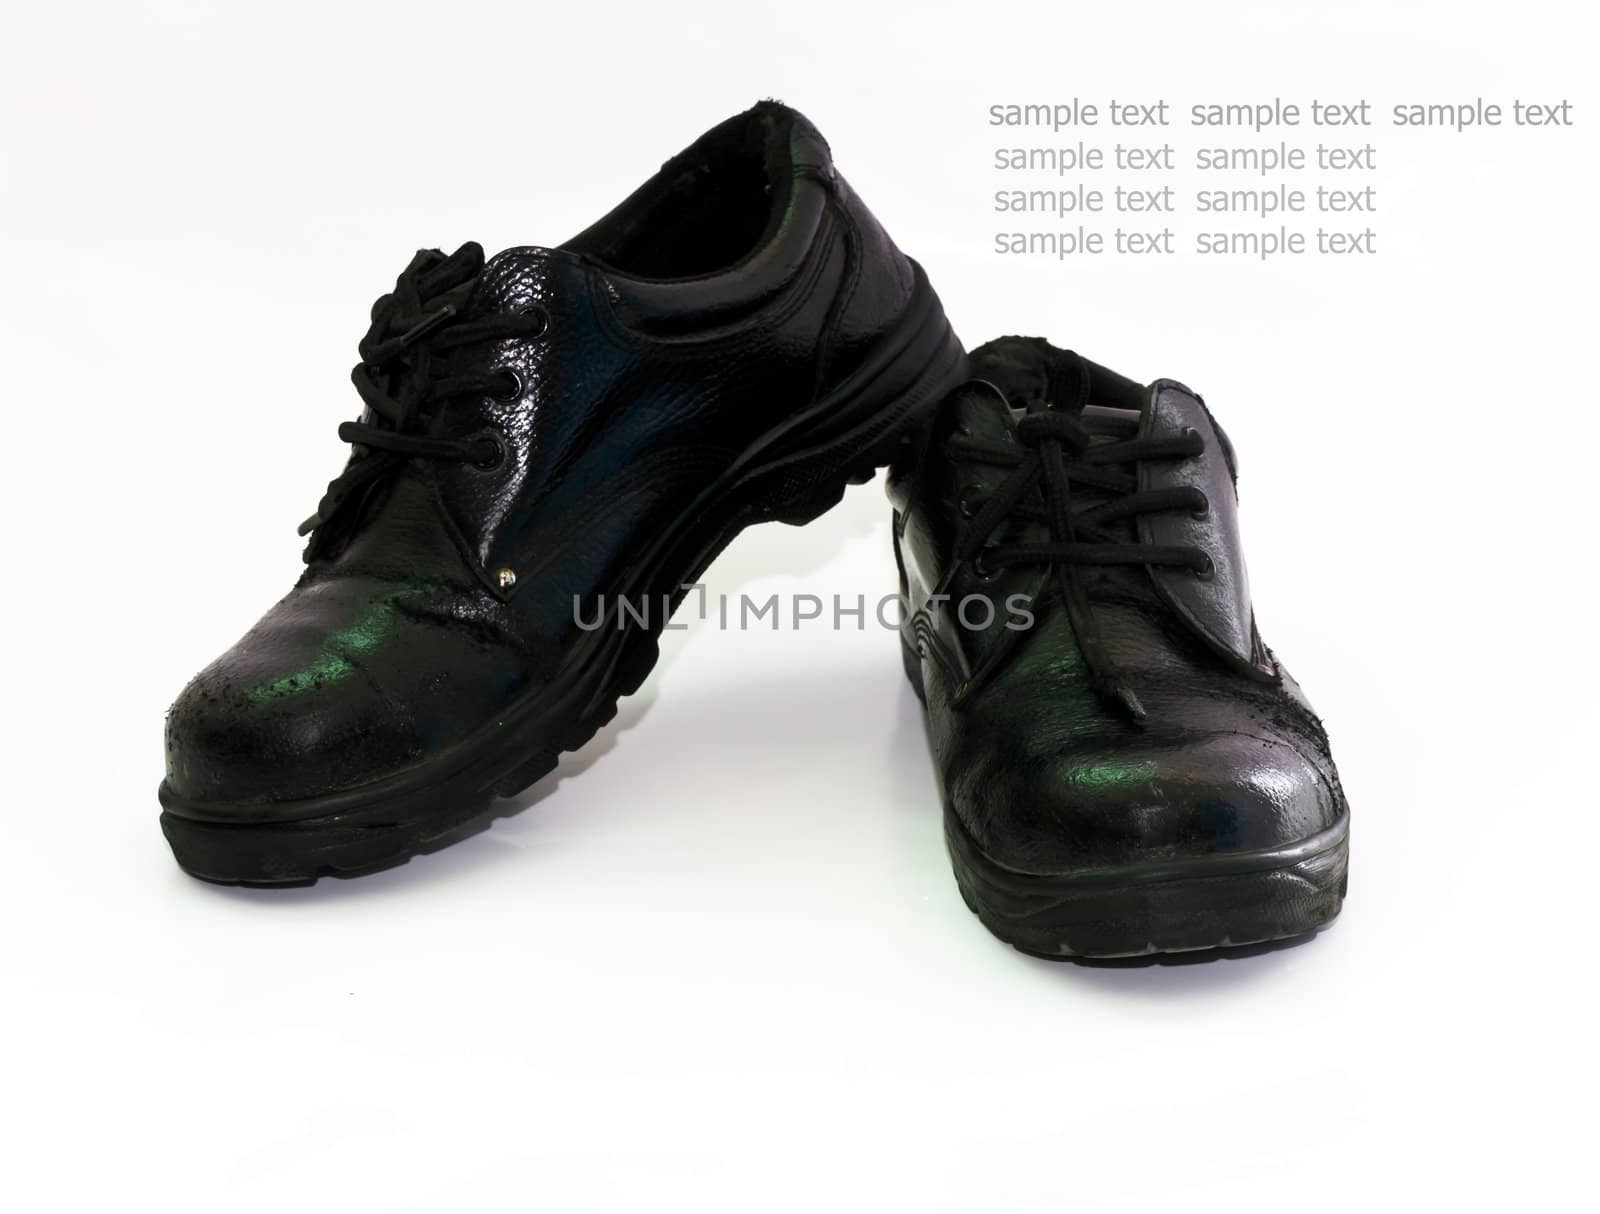 Safety shoes to prevent accidents to the person wearing the body.